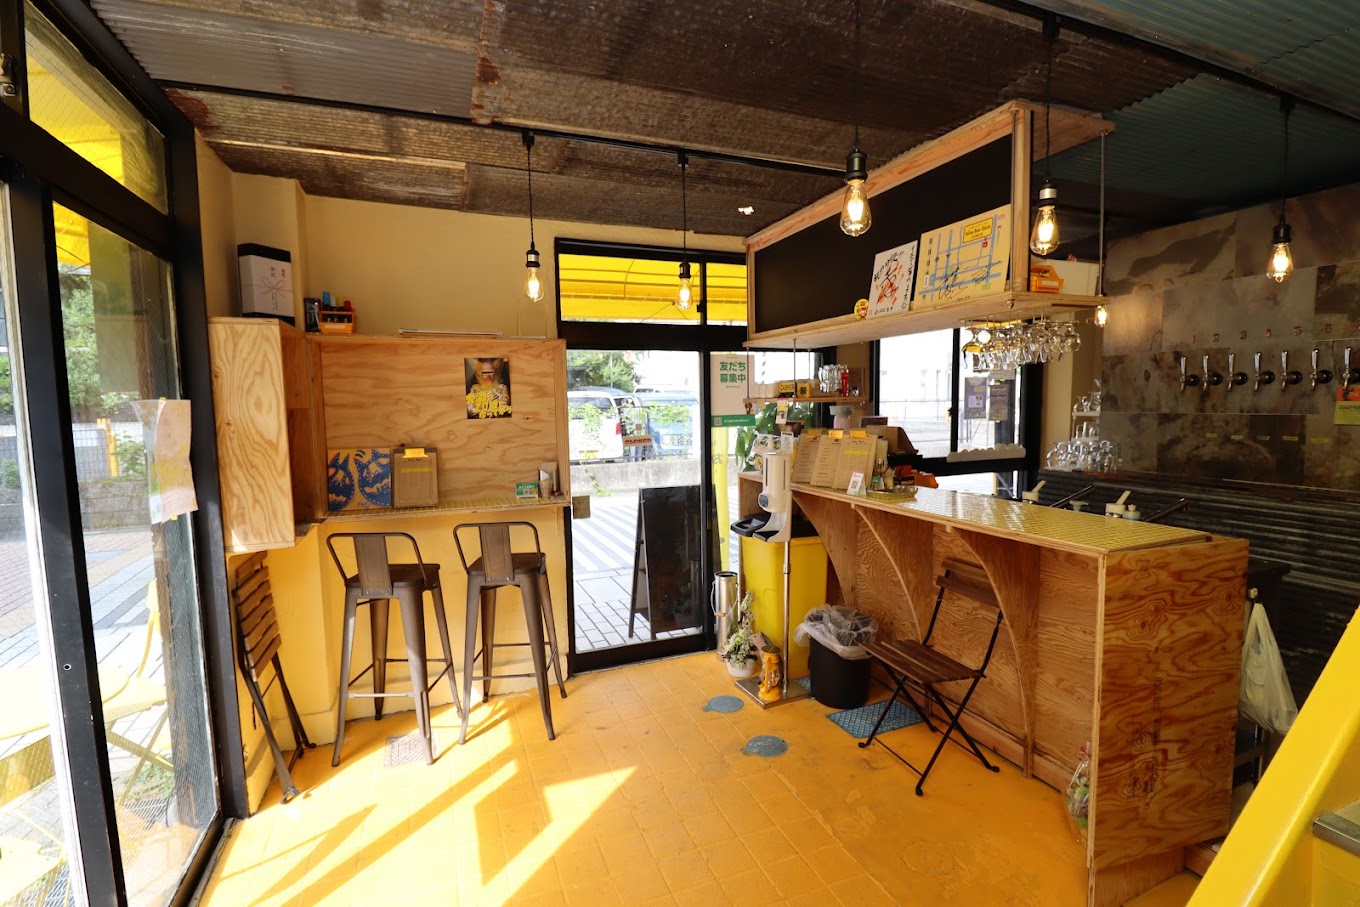 yellow beer works 文化通り店